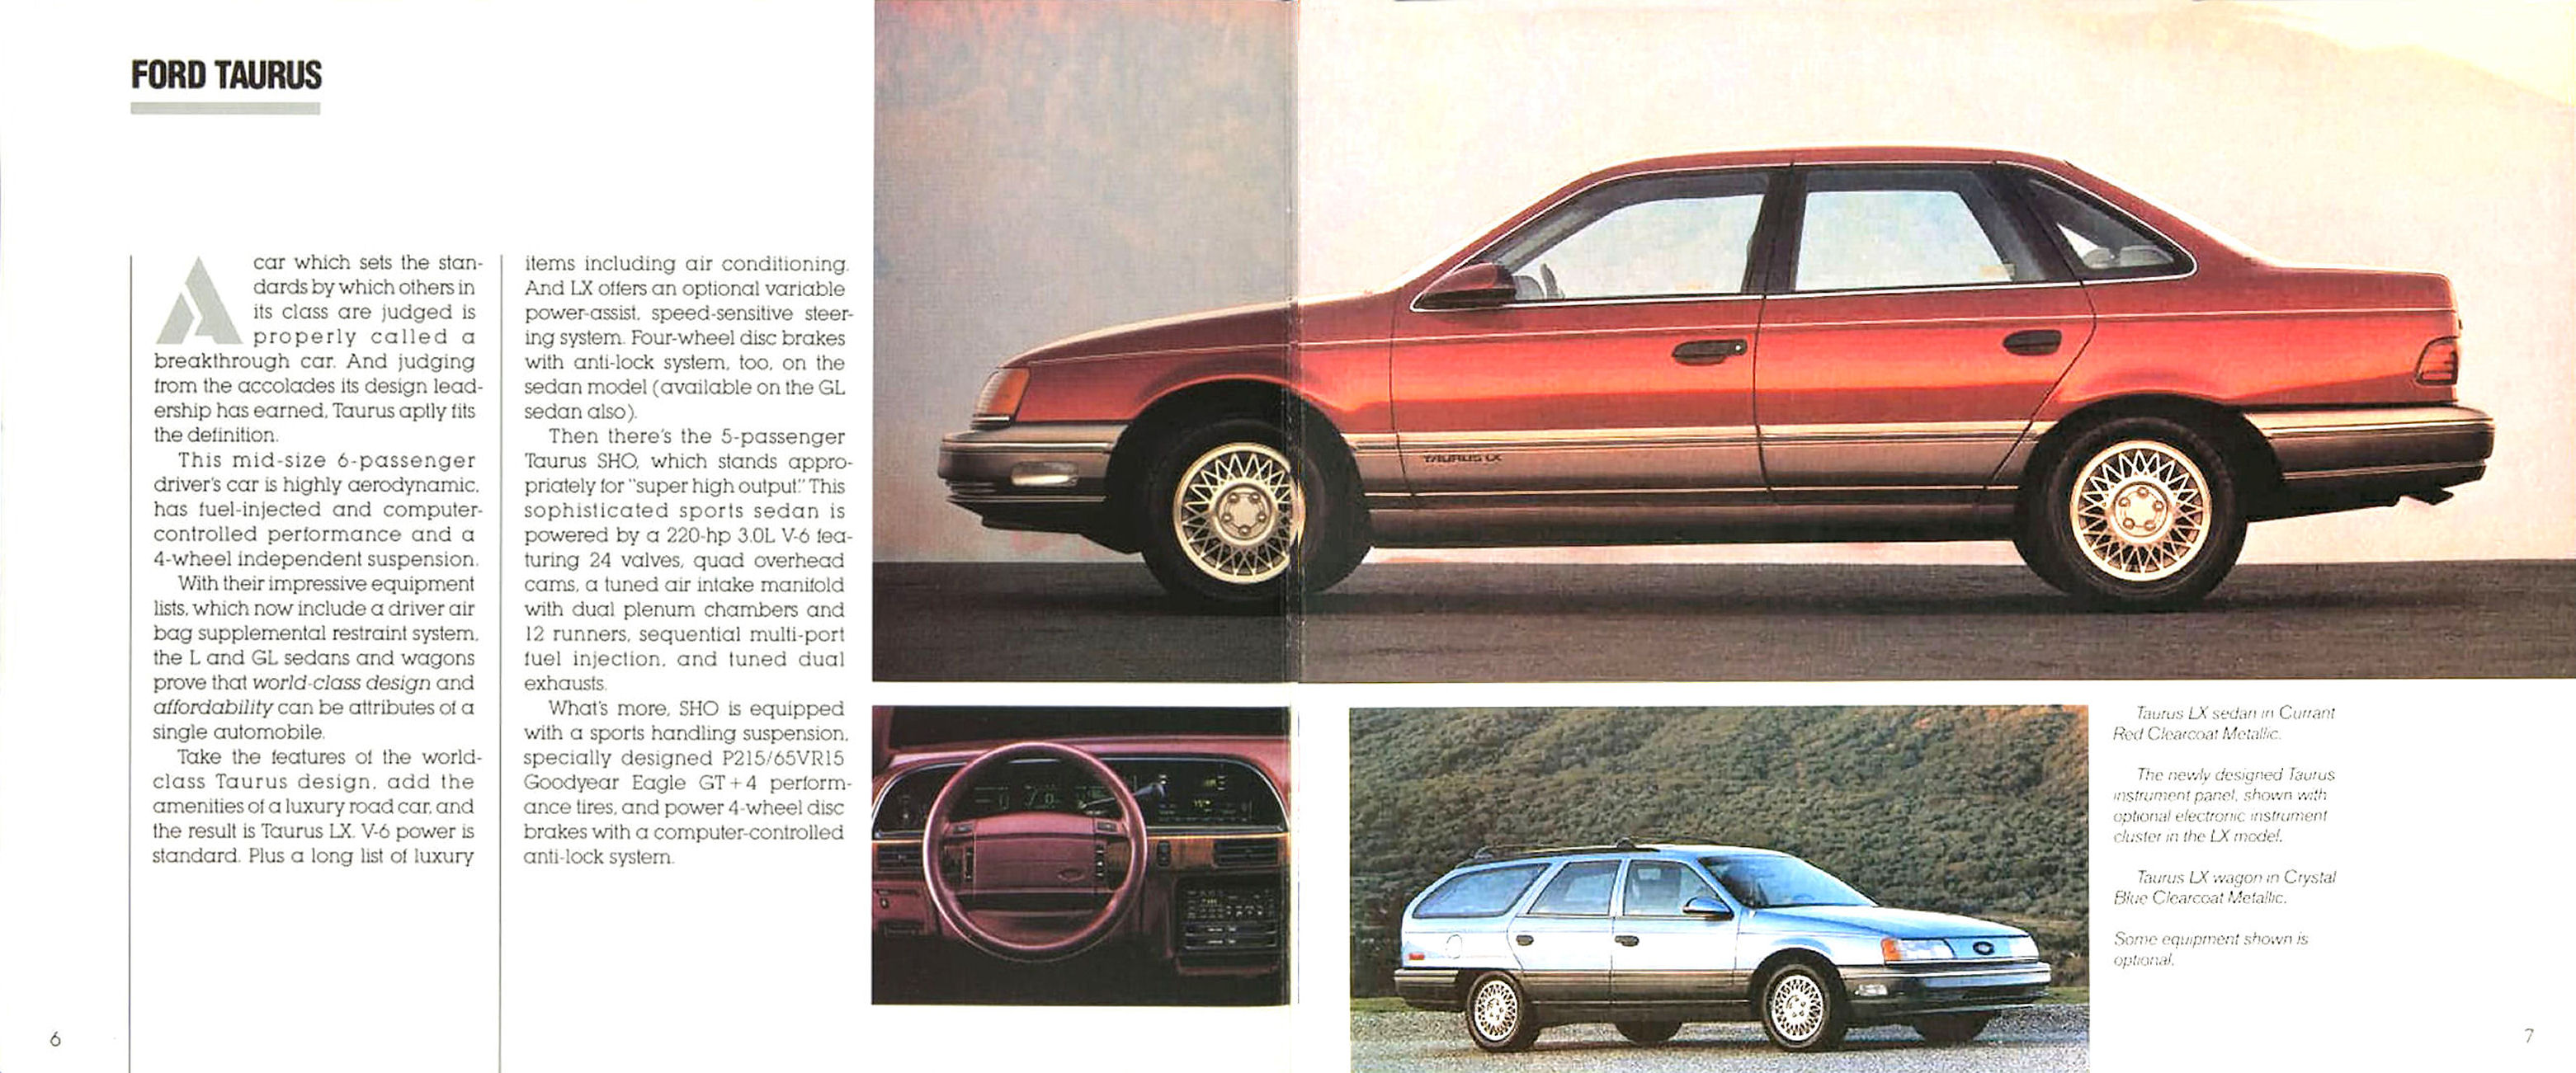 1990_Ford_Cars-06-07